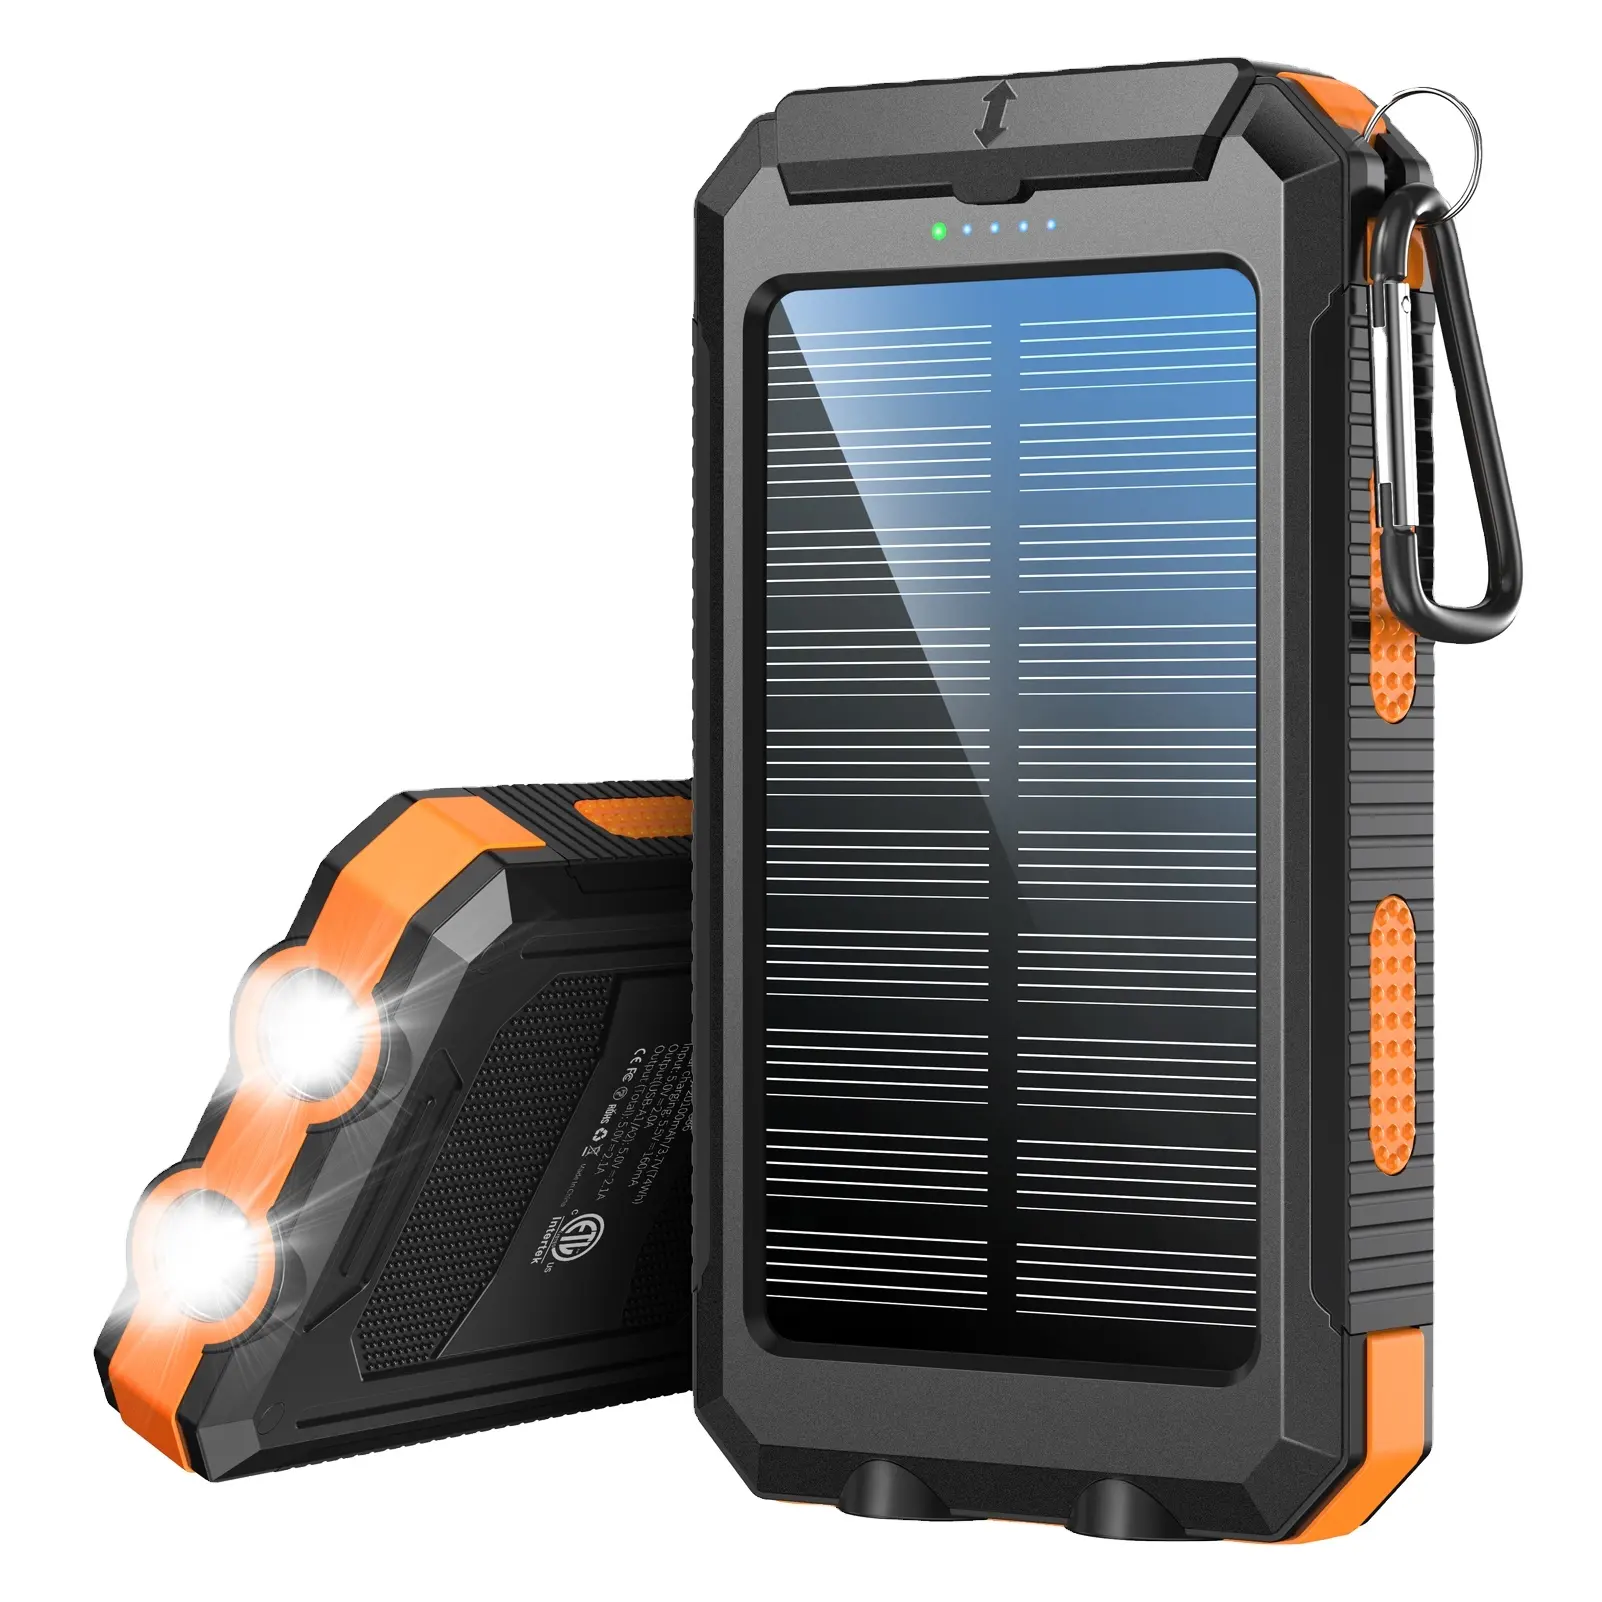 Trending hot products solar powered phone charger 30000mah free shipping